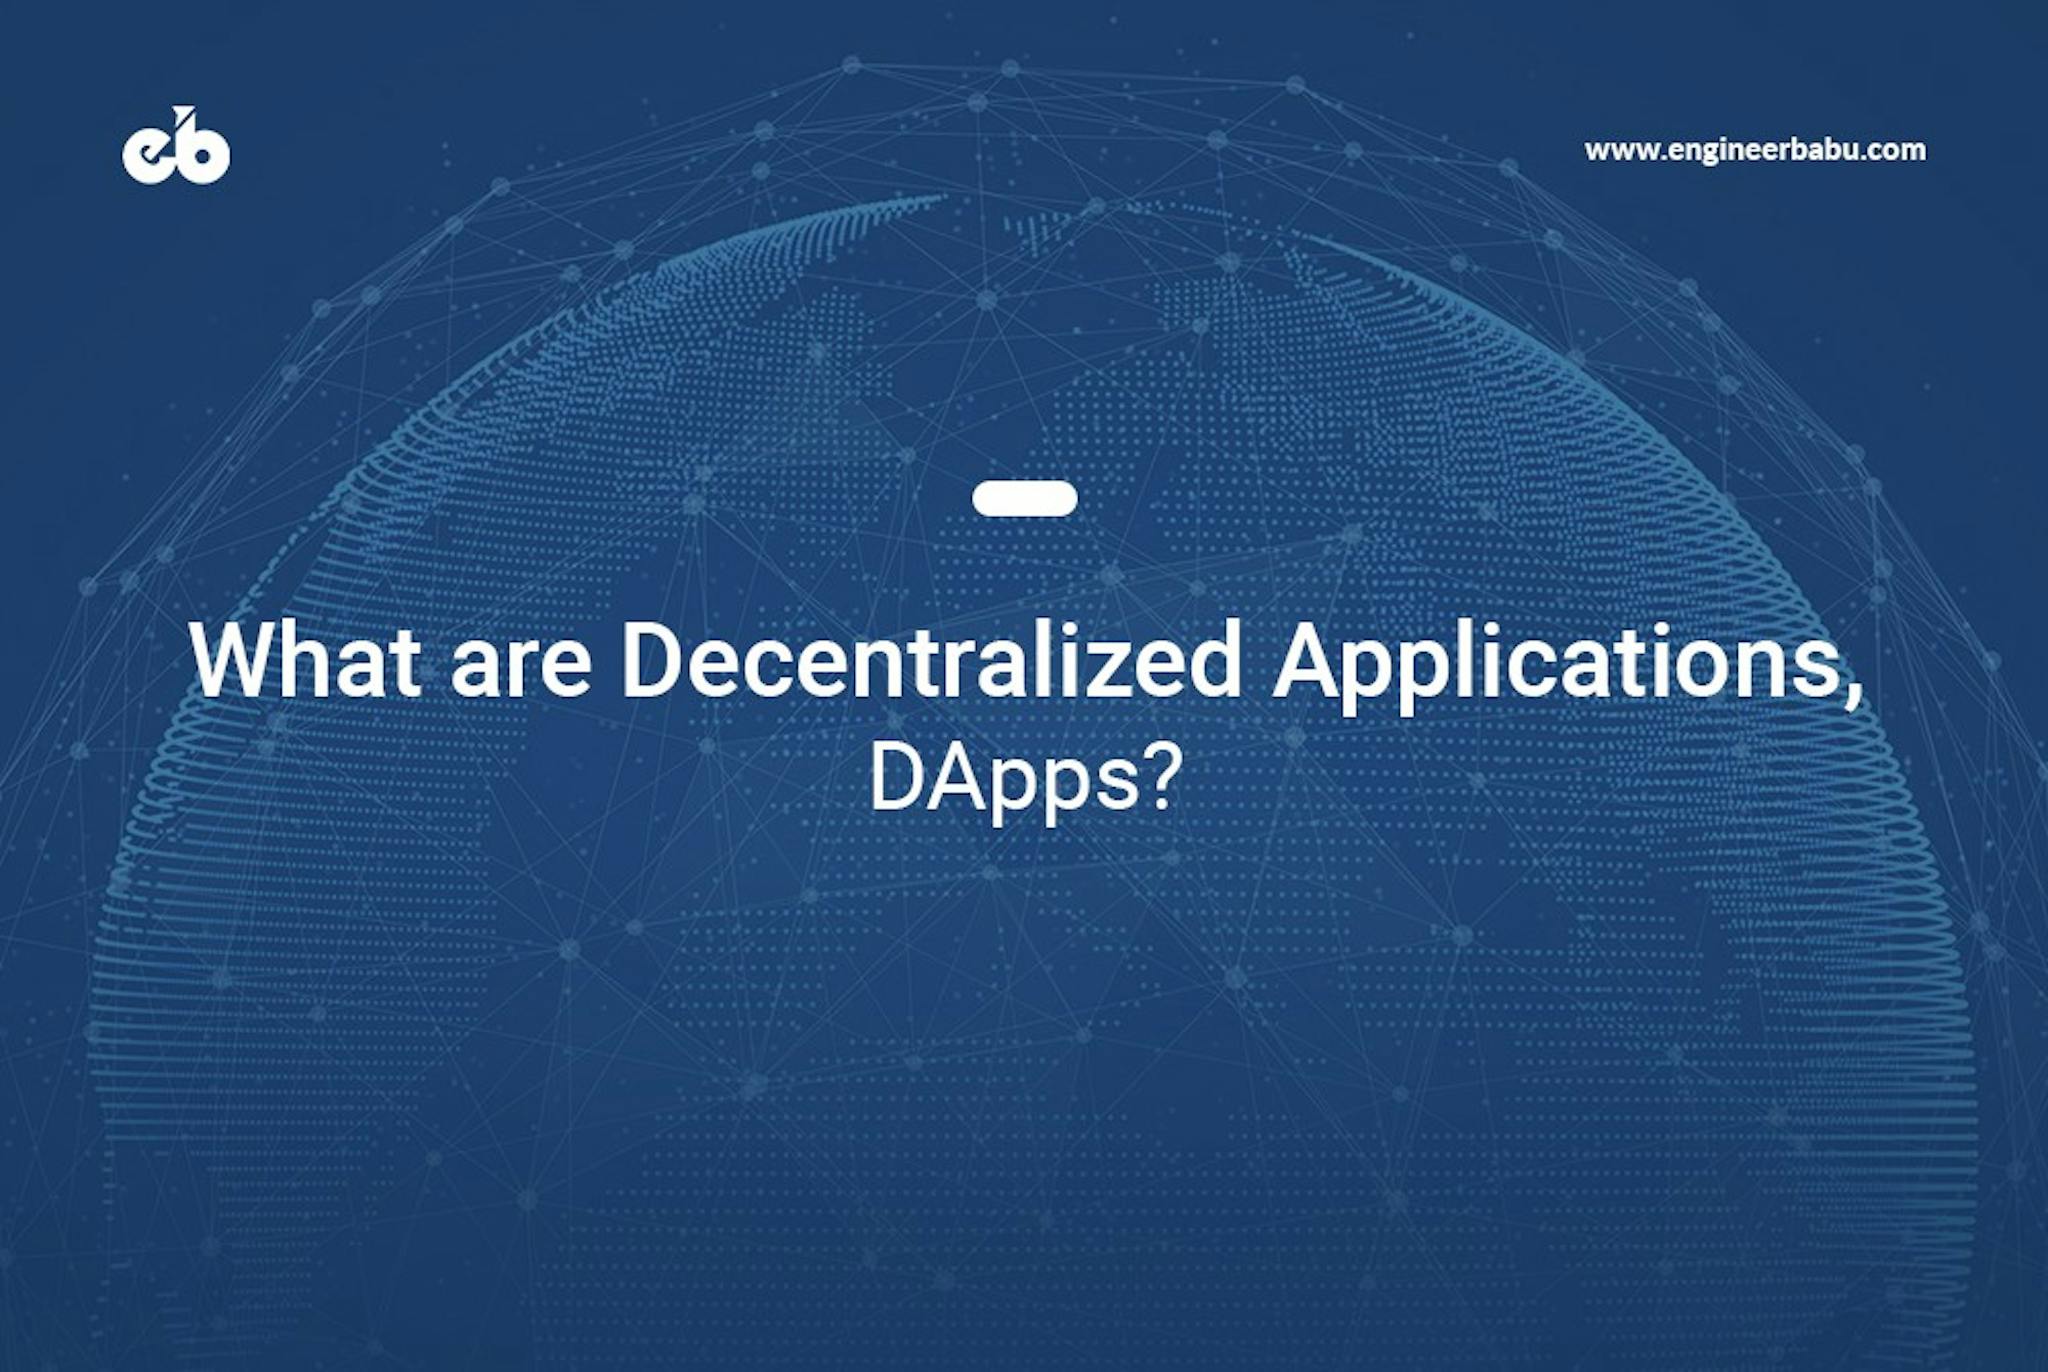 featured image - What are Decentralized Applications, DApps?